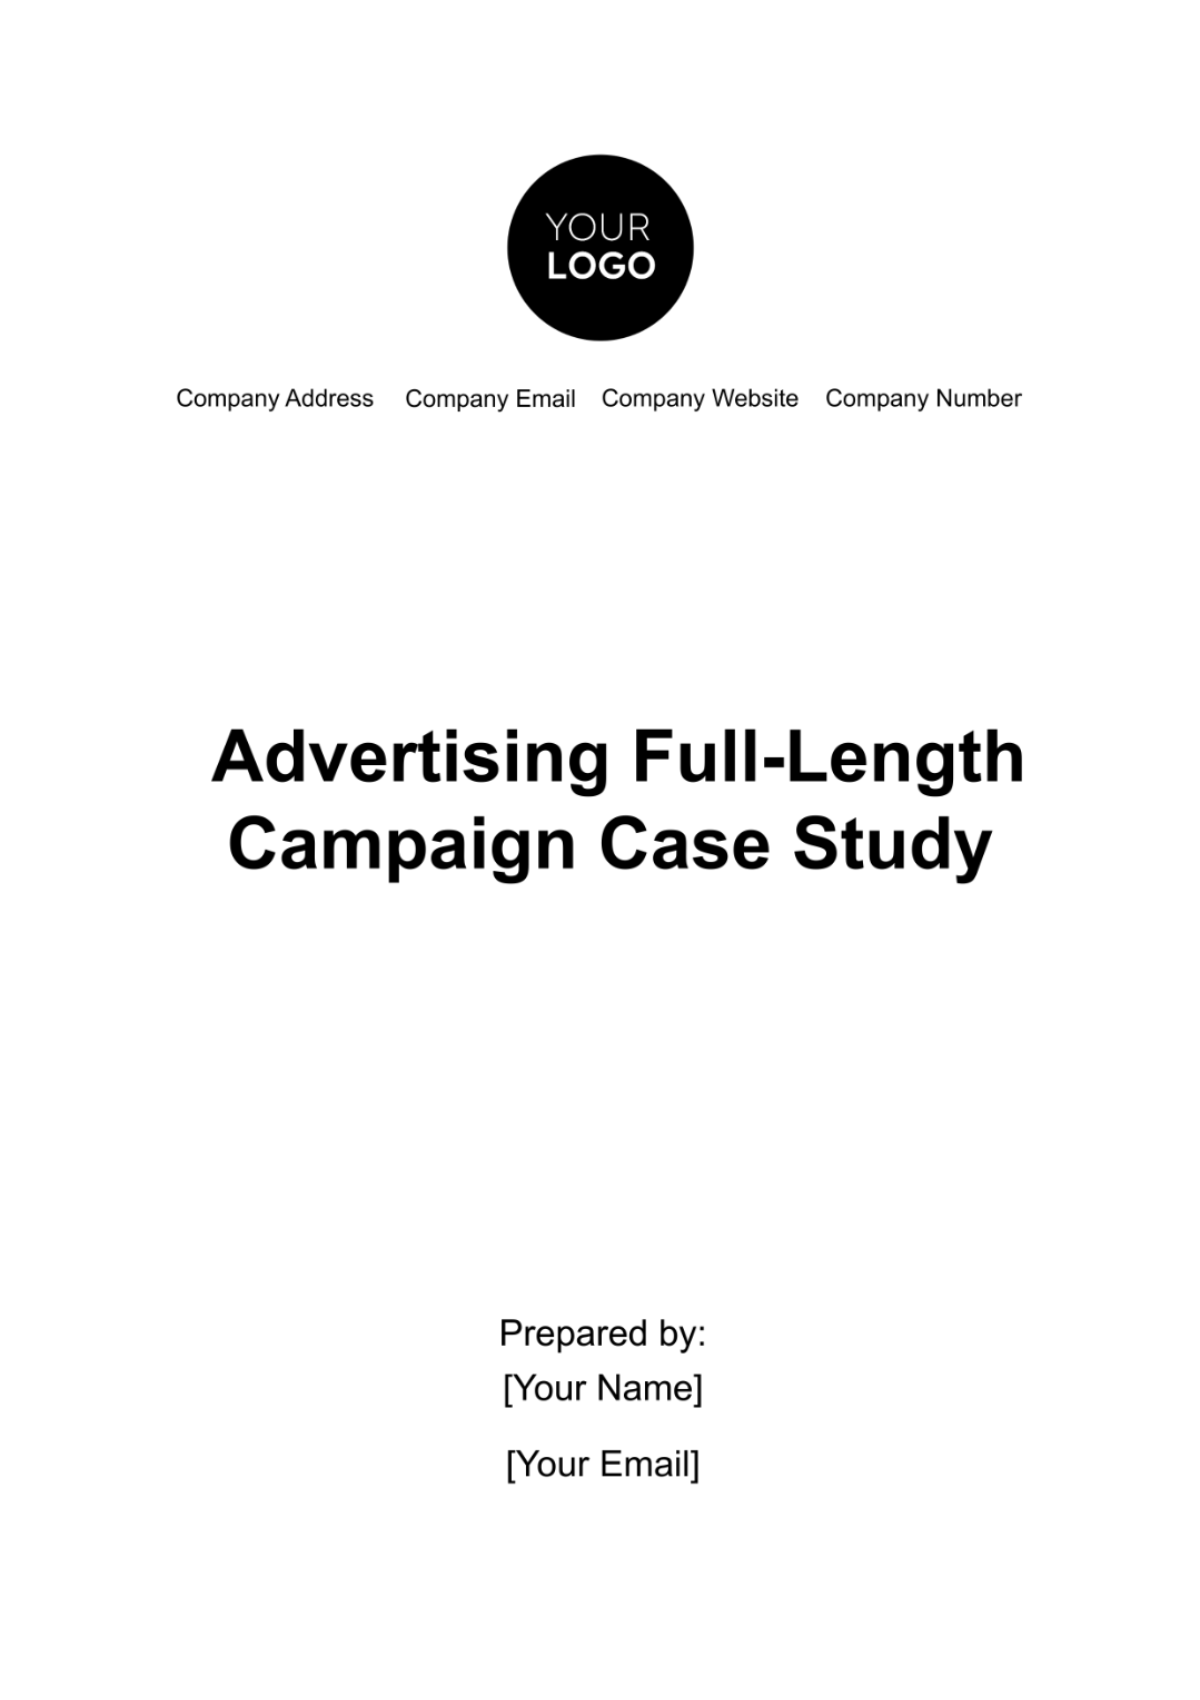 Free Advertising Full-Length Campaign Case Study Template